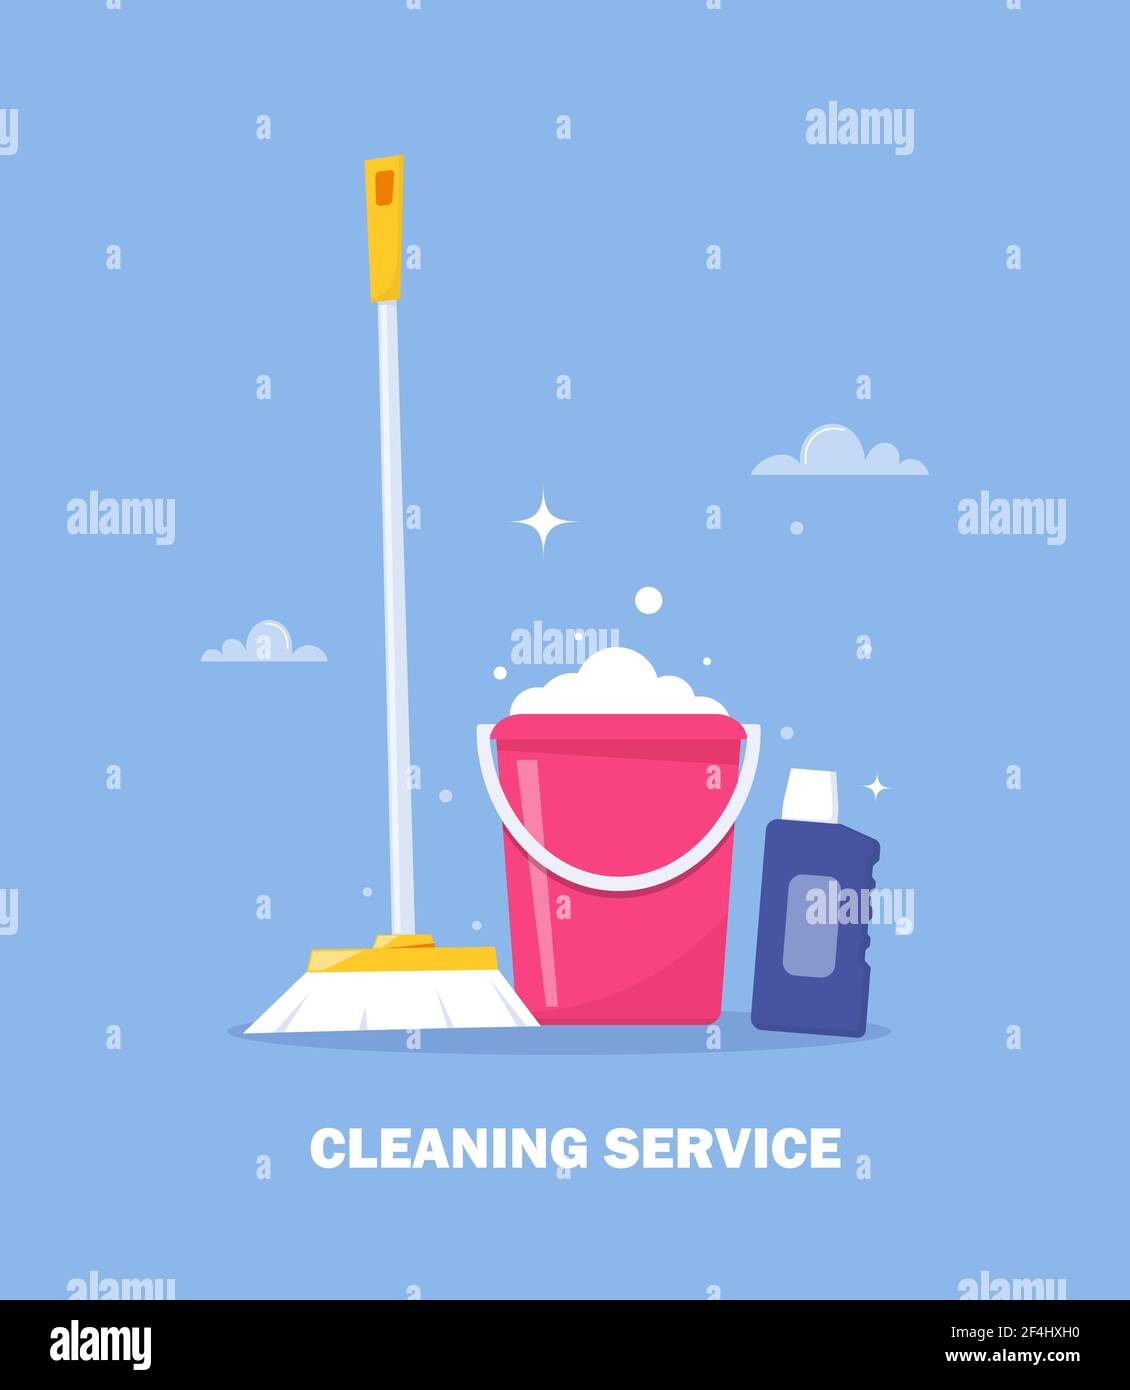 Cleaning service and household supplies. Design concept for web banner, infographic, poster. Detergent and disinfectant products with bucket, mop, det Stock Vector